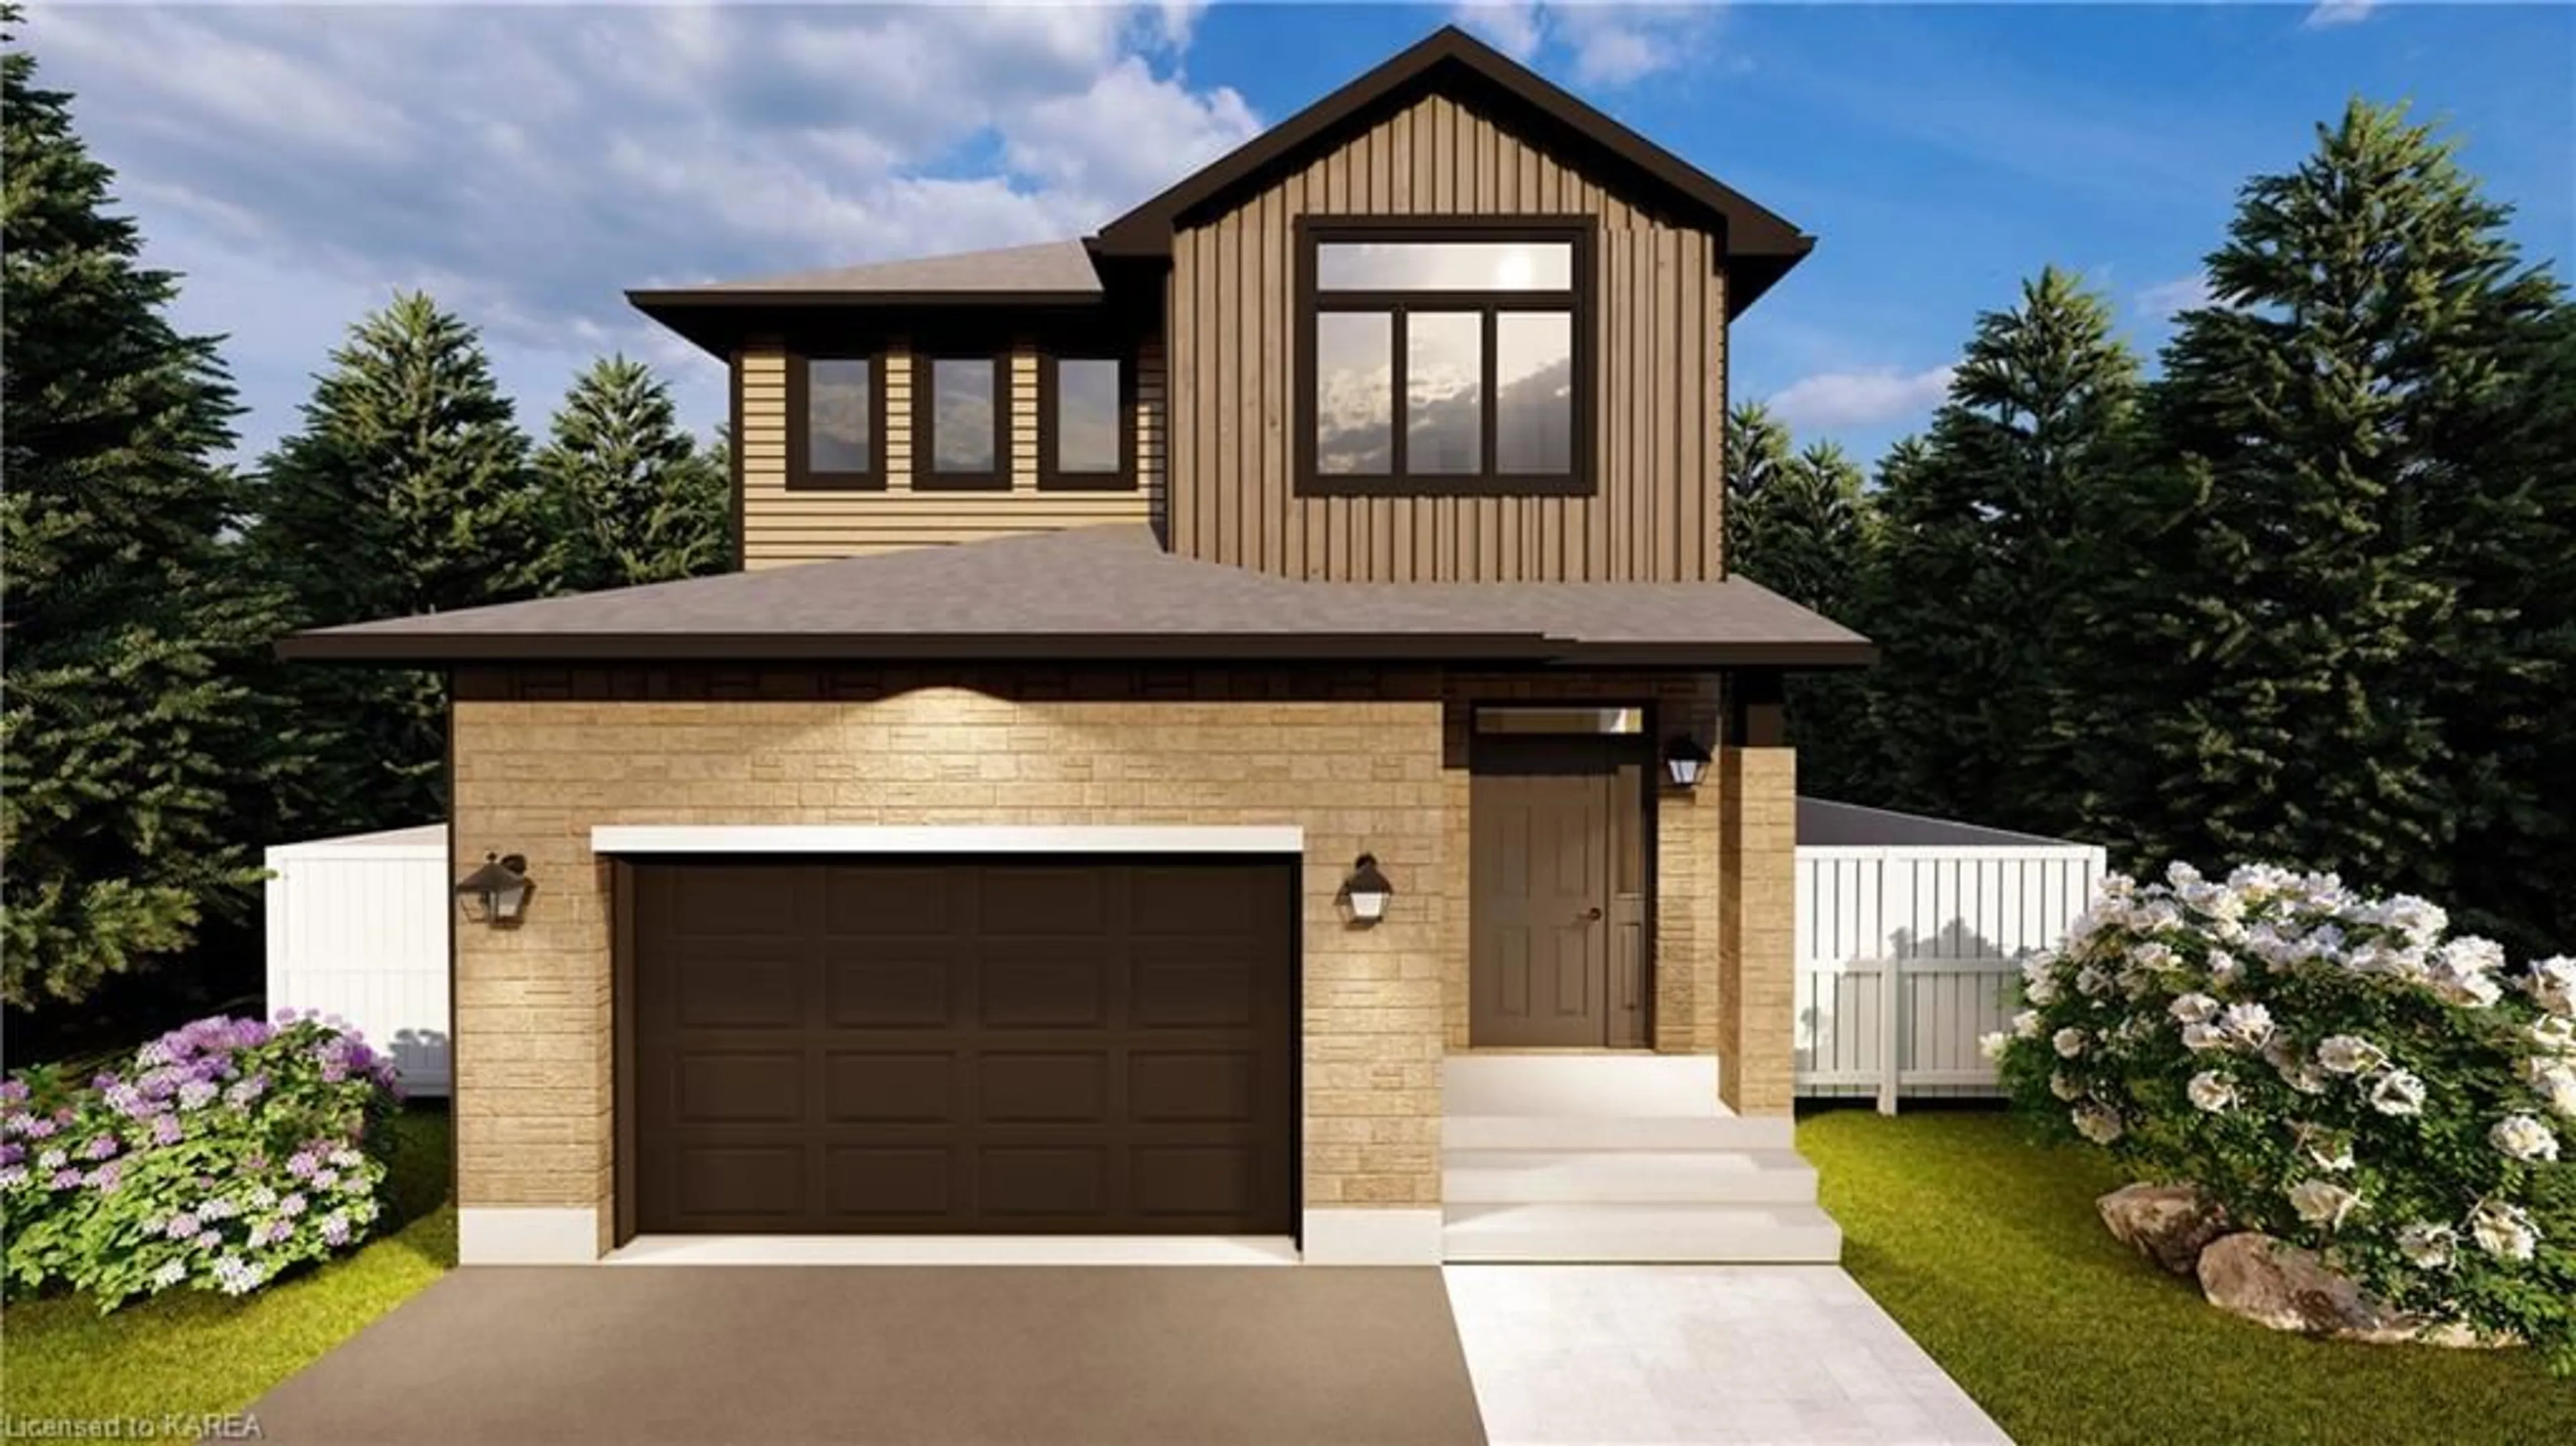 Home with brick exterior material for 1318 Turnbull Way #Lot E27, Kingston Ontario K7P 0T3